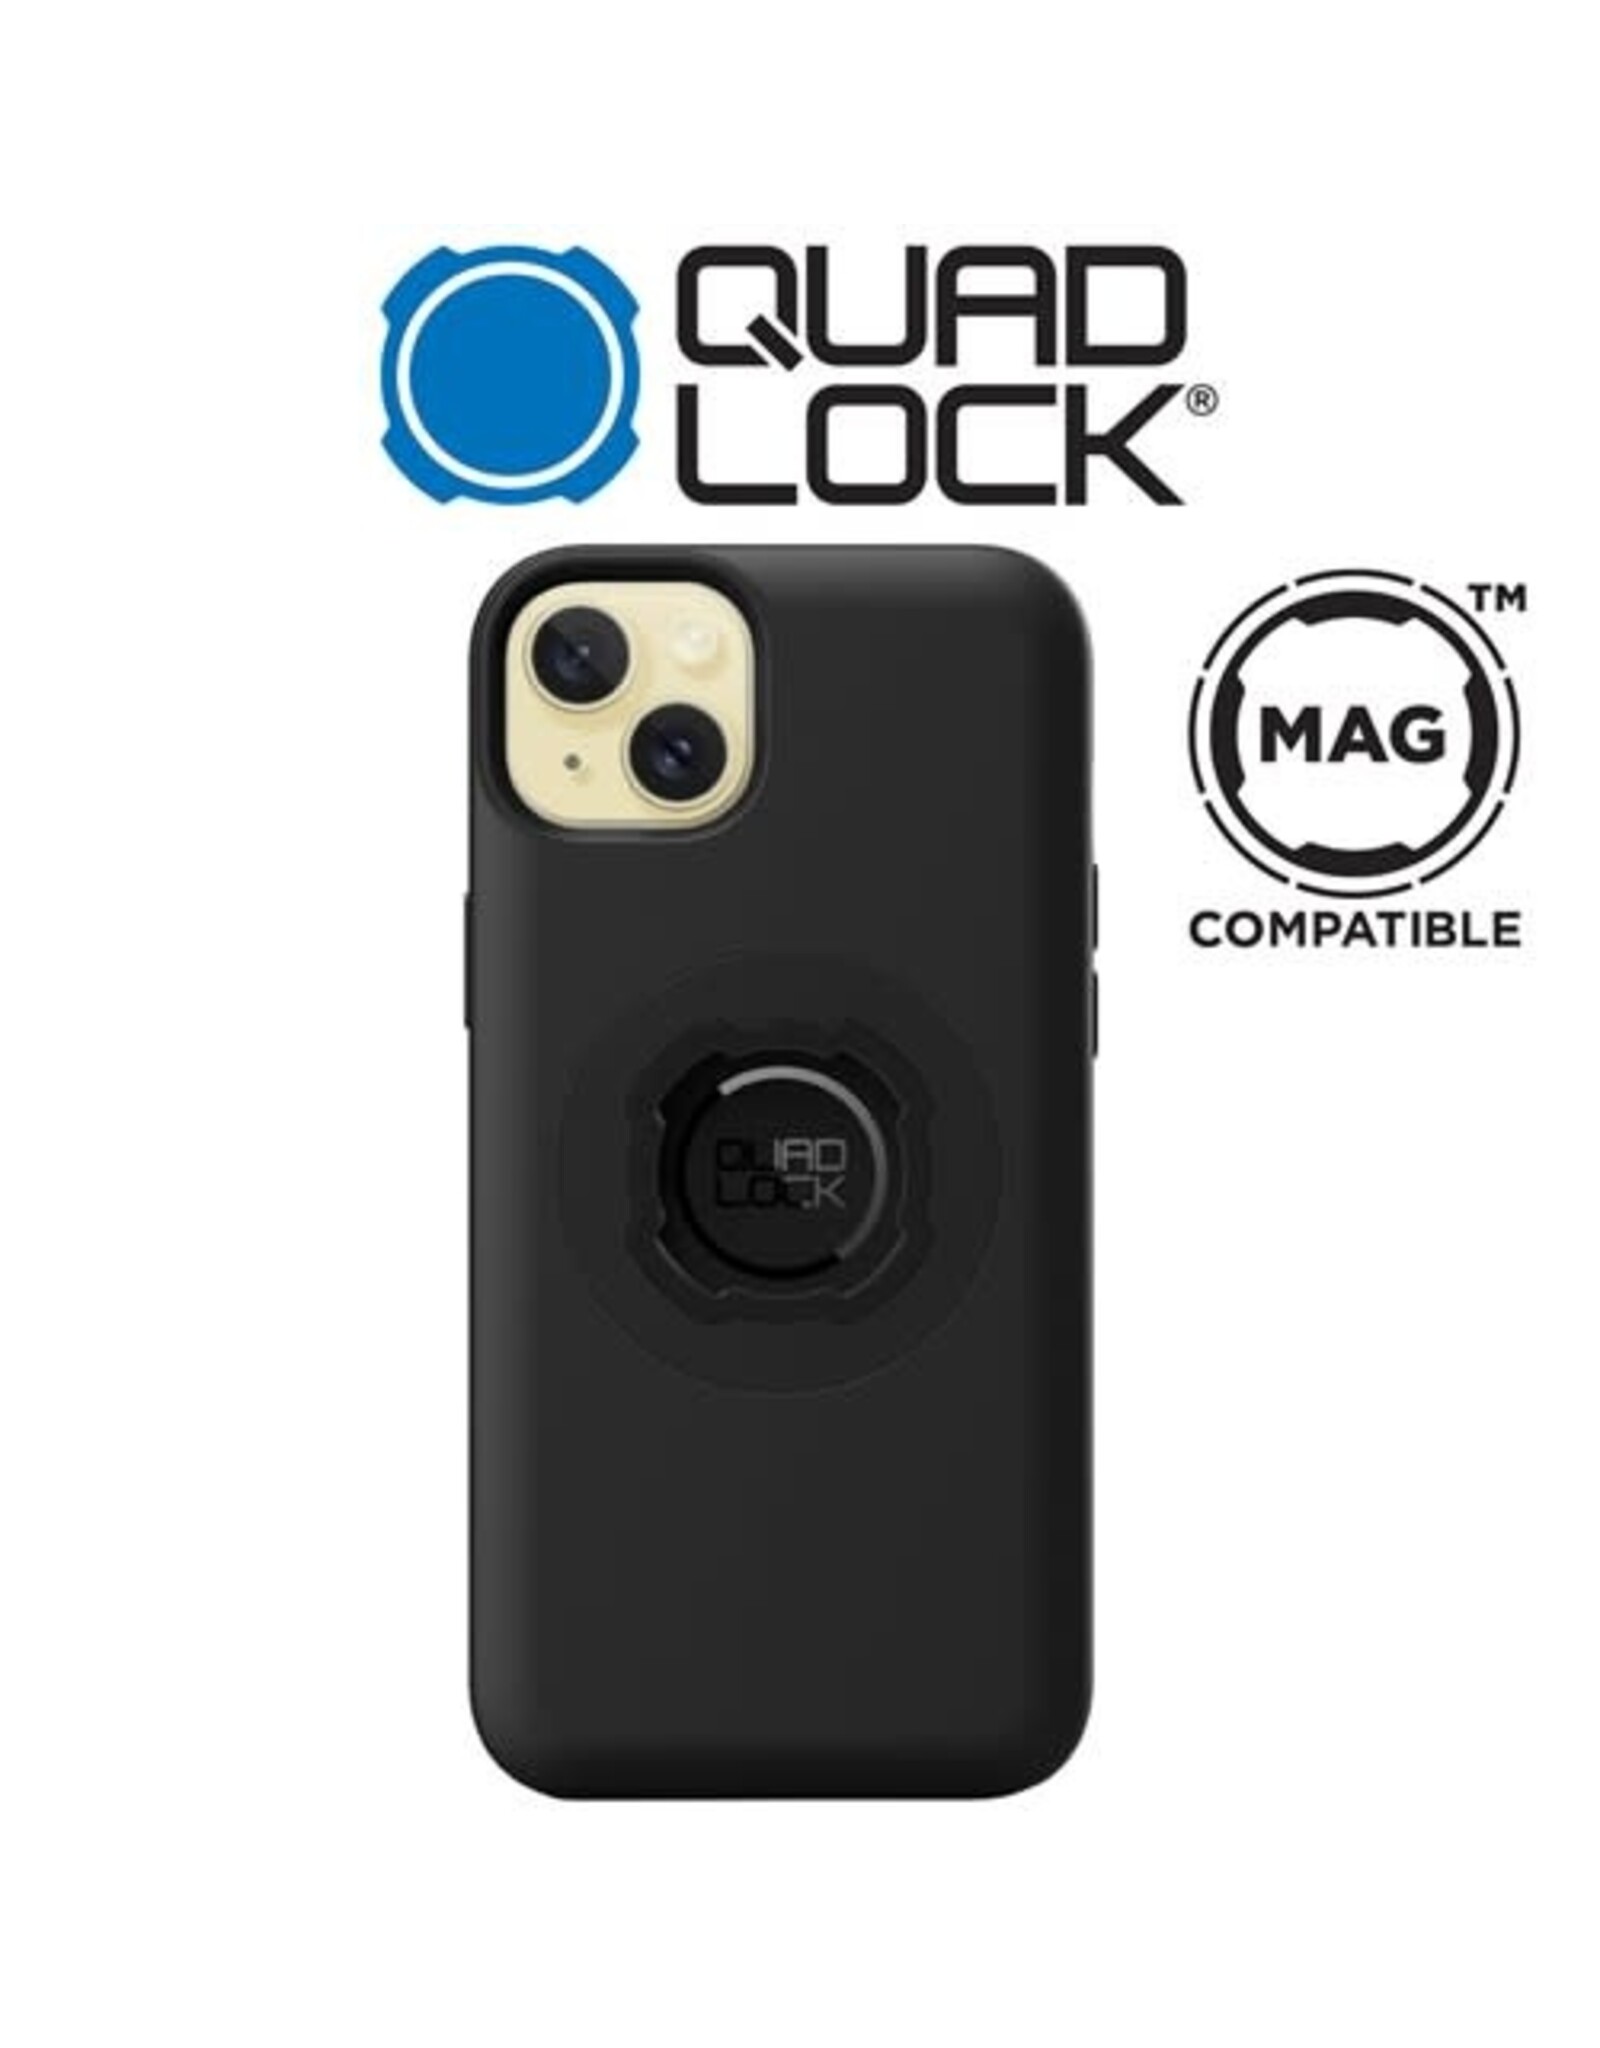 Watch this before you buy the Quad Lock Mag Case and avoid your phone  ending up like mine! 